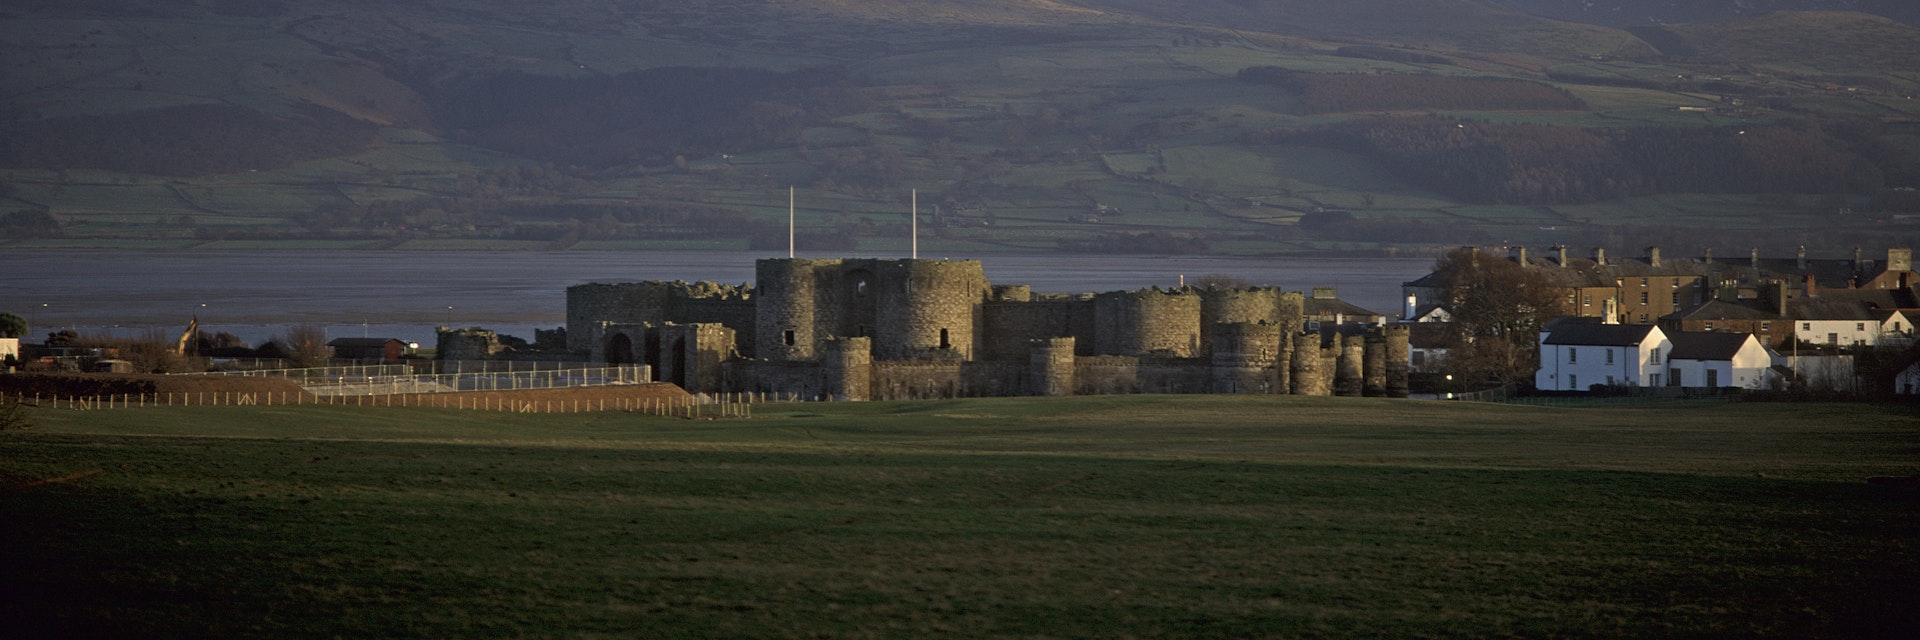 Landscape view of Beaumaris Castle, a World Heritage Site, Beaumaris, Isle of Anglesey, Wales.